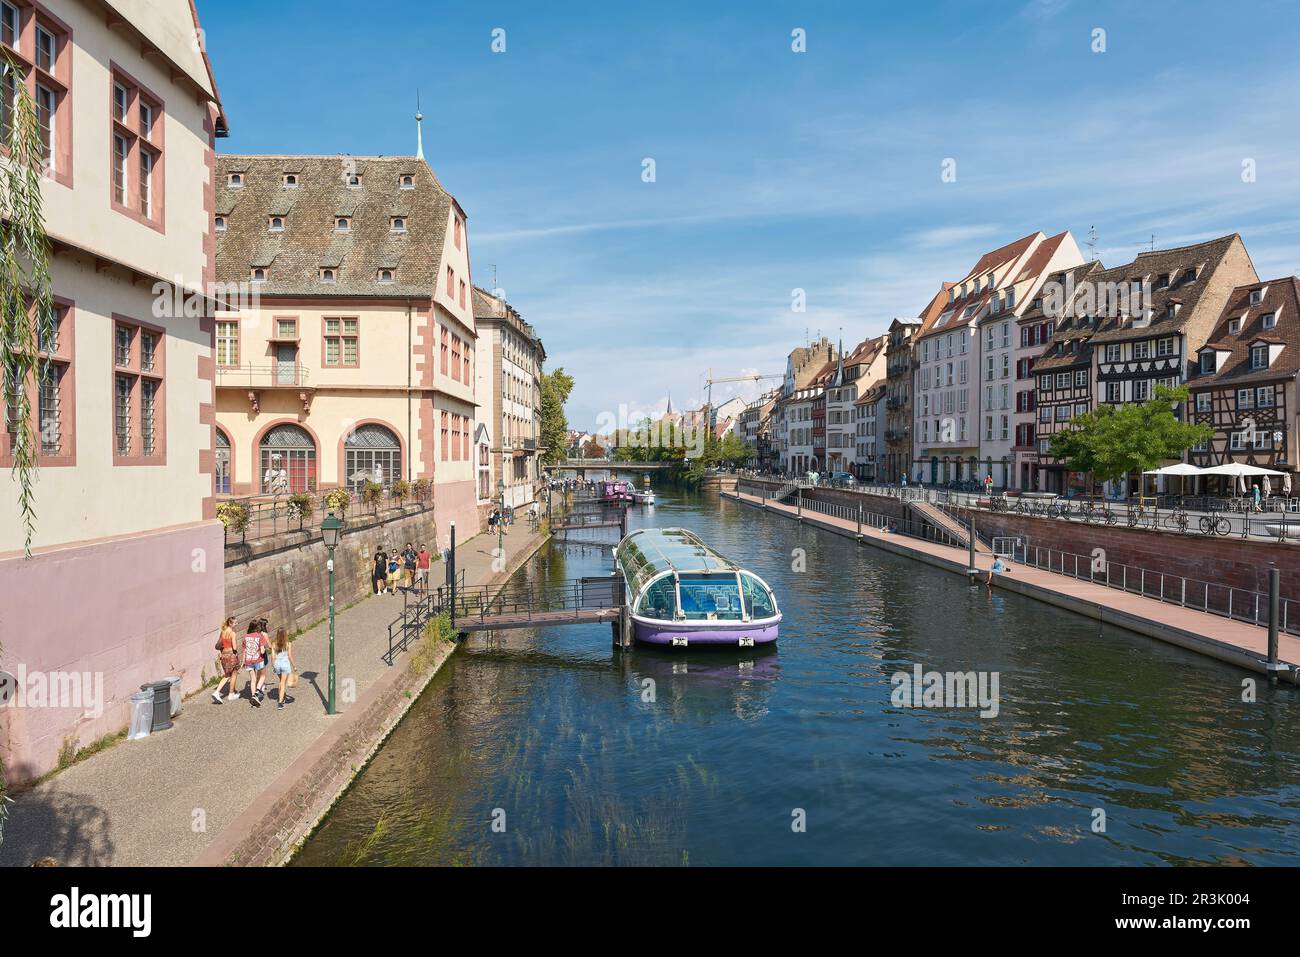 Old town of Strasbourg in France with a landing stage for excursion boats on the river Ill Stock Photo